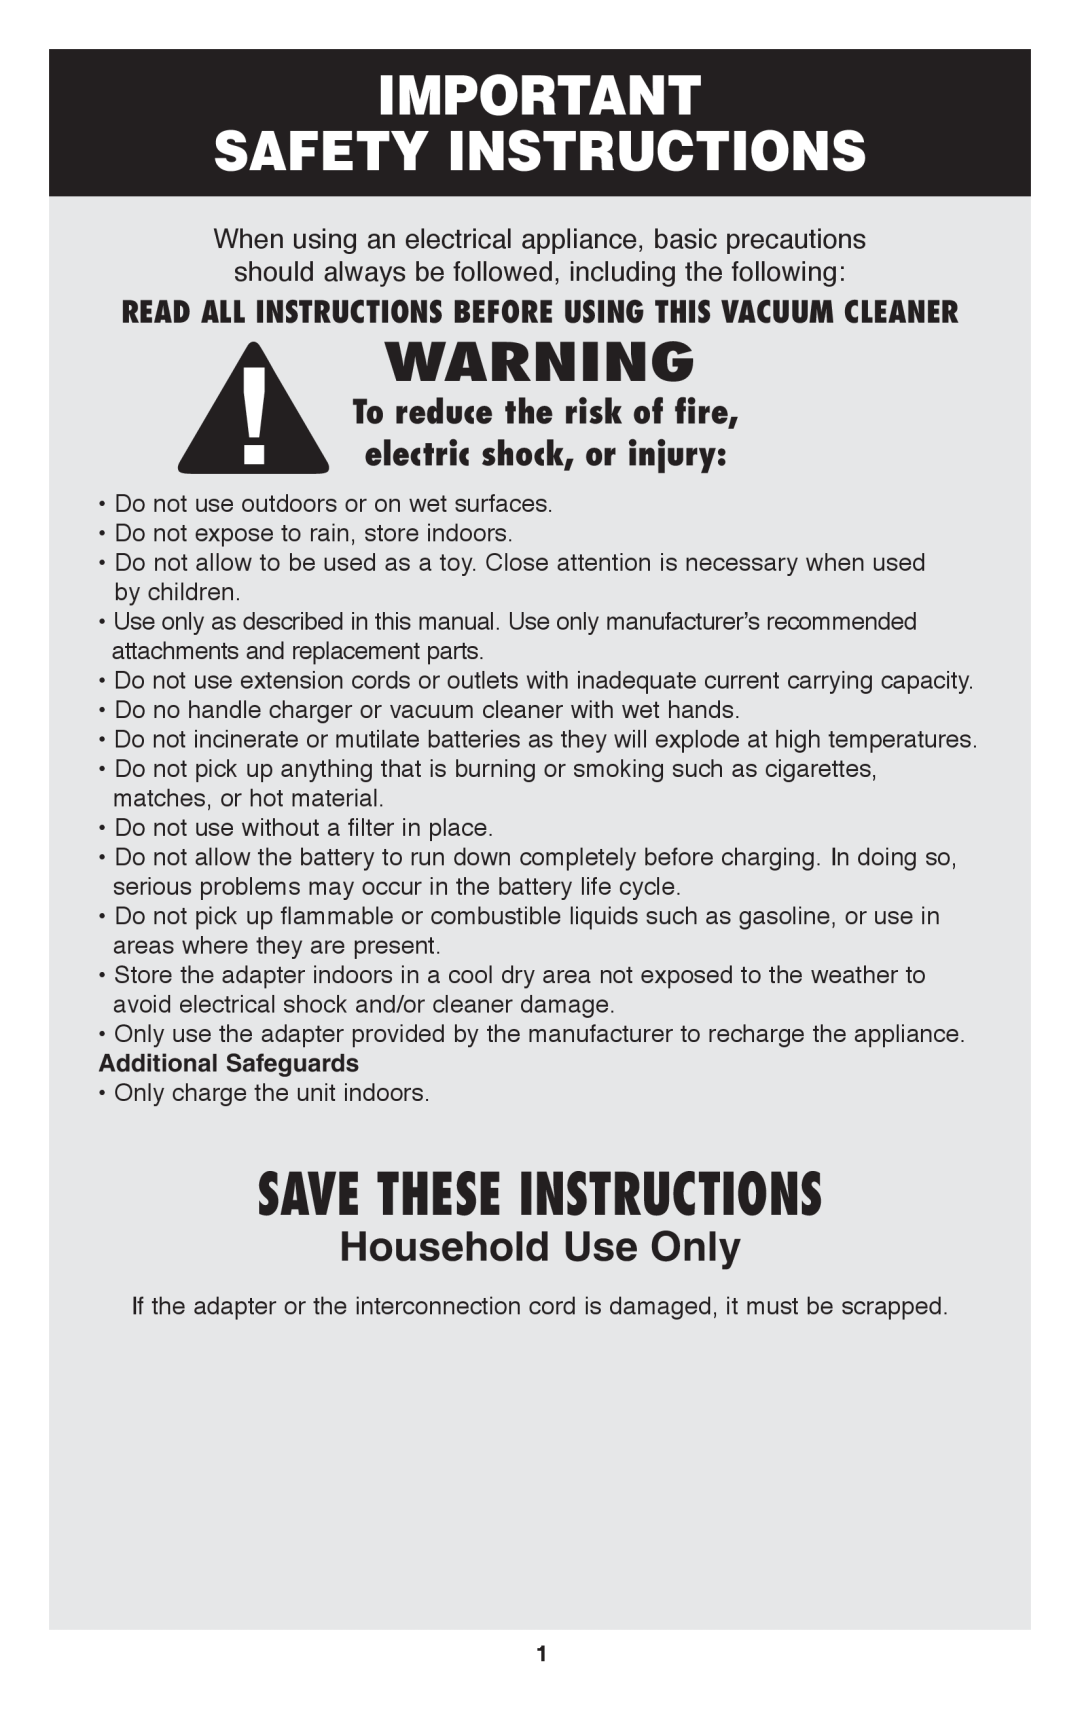 Oreck TEK 100 Safety Instructions, Save These Instructions, Household Use Only, Additional Safeguards 